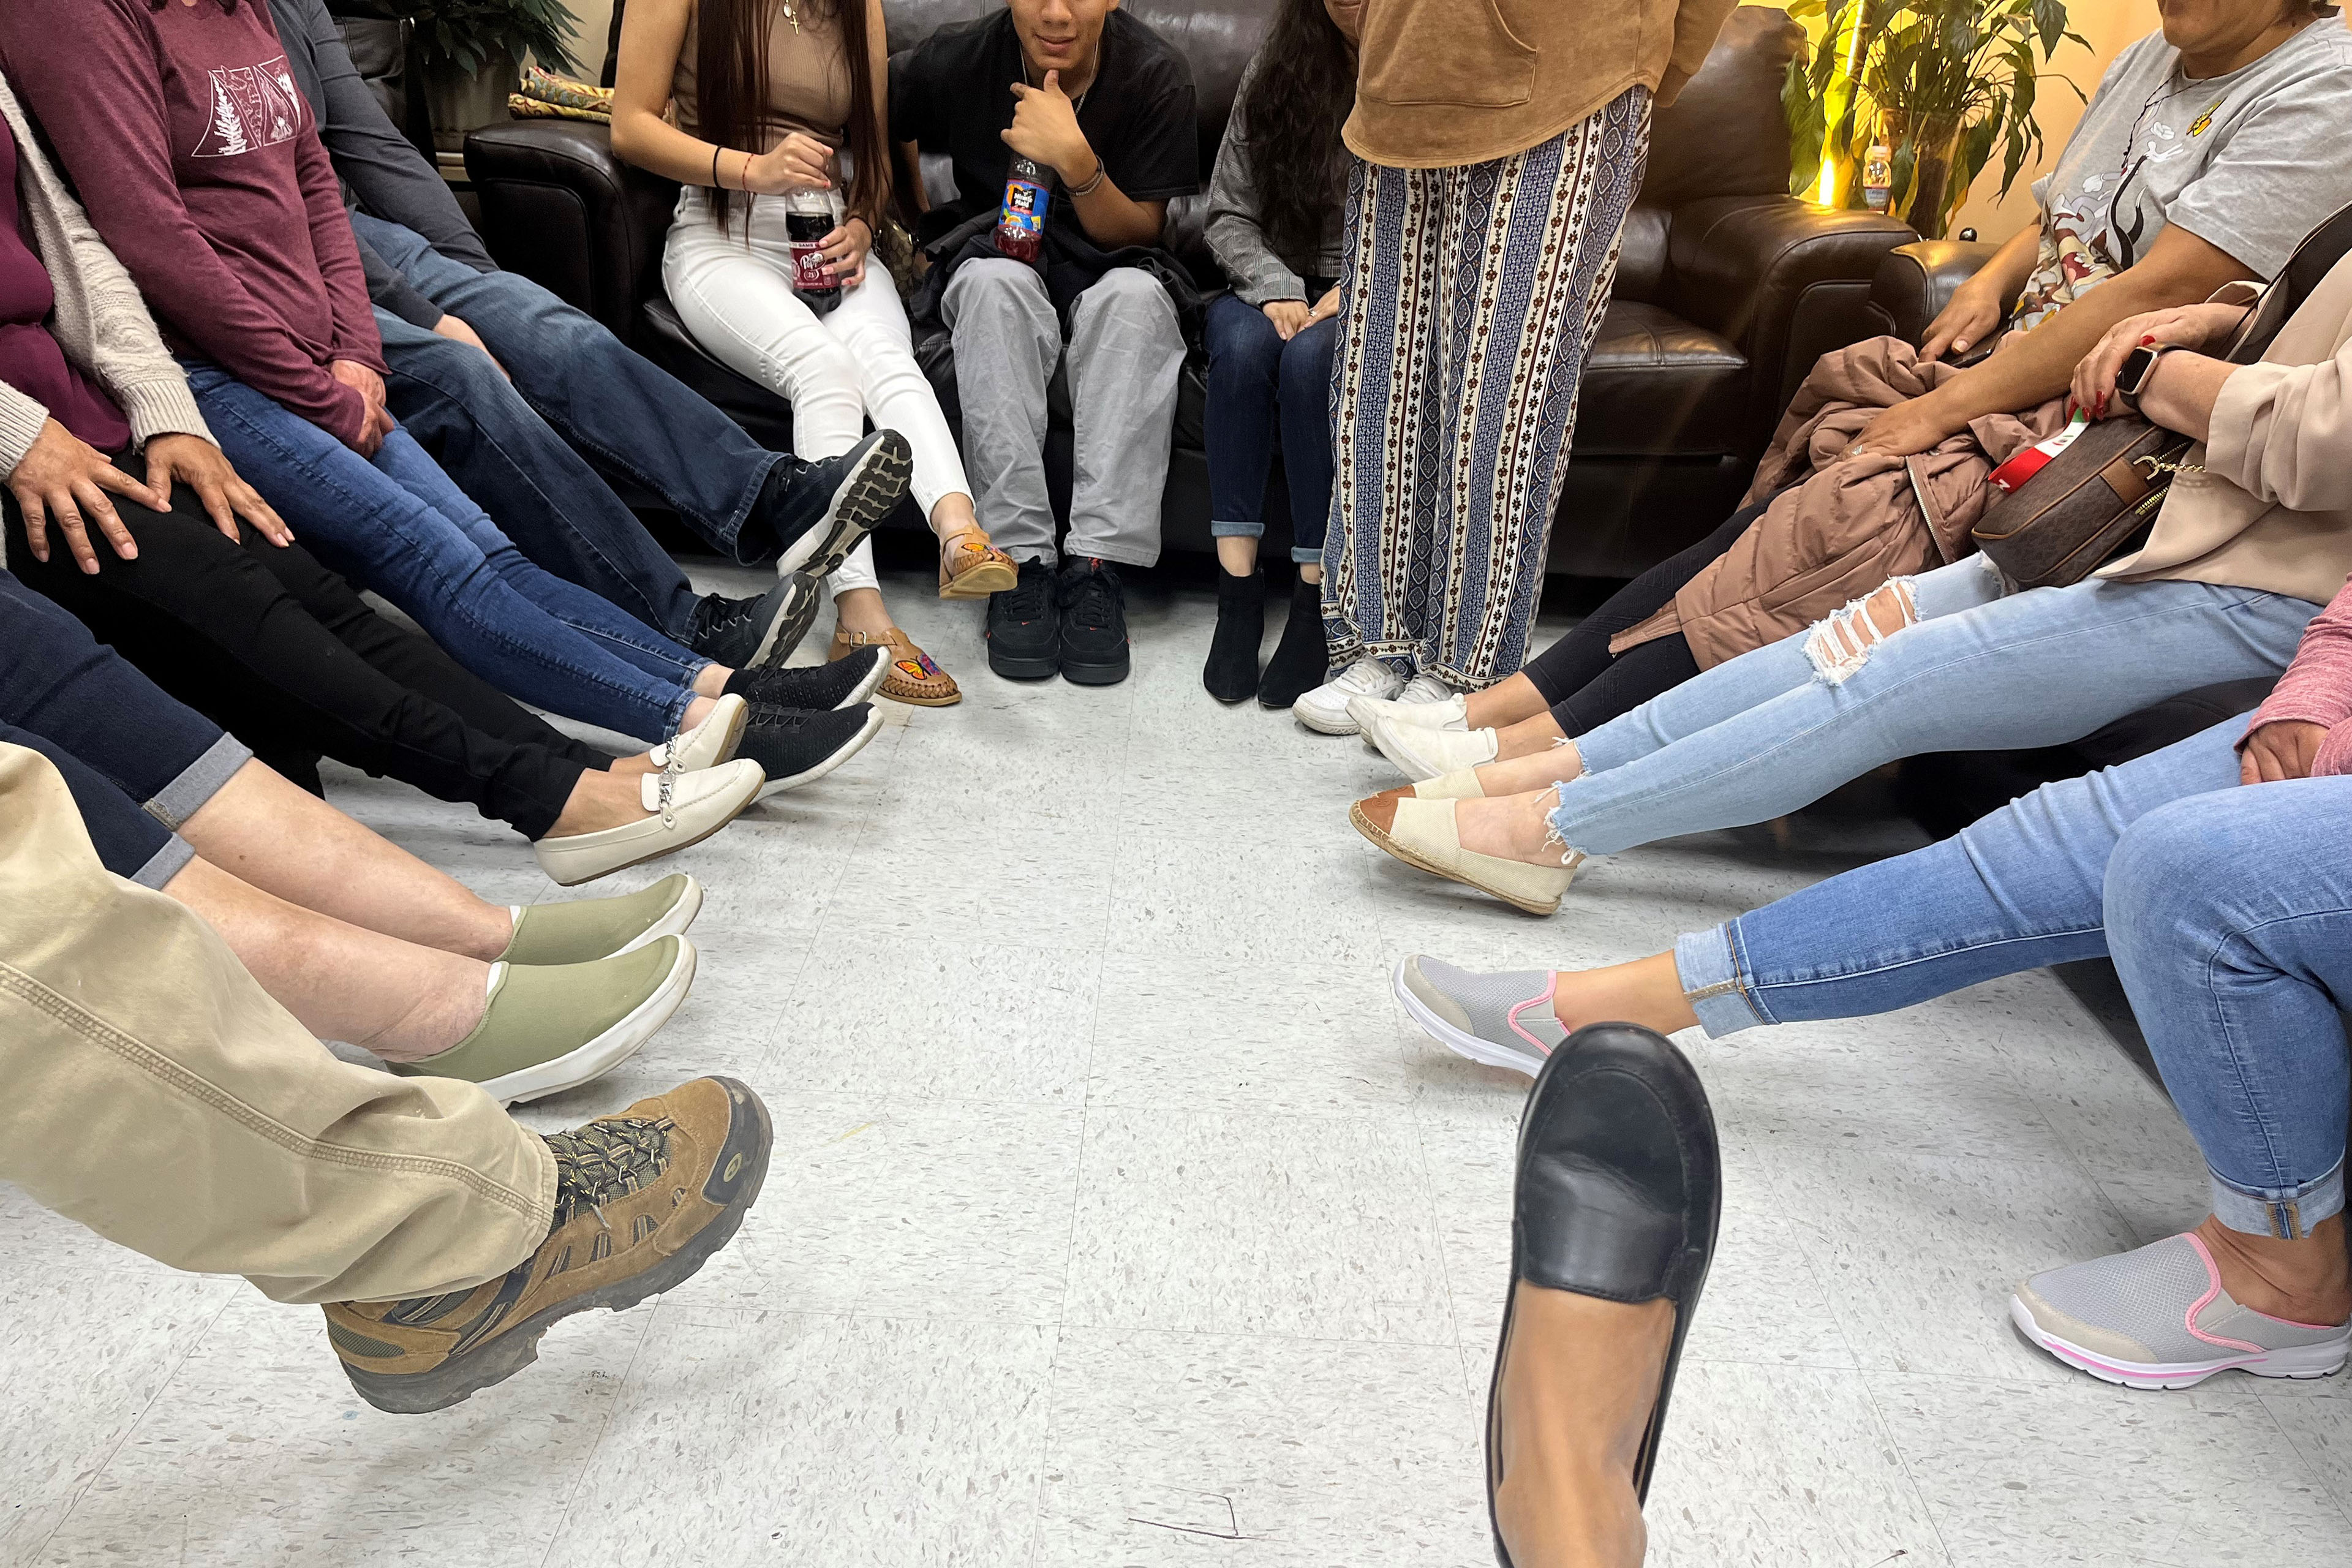 A photograph of a group of people sitting on chairs in a circle from the legs down. The group all stretches out their feet to the center of the circle.